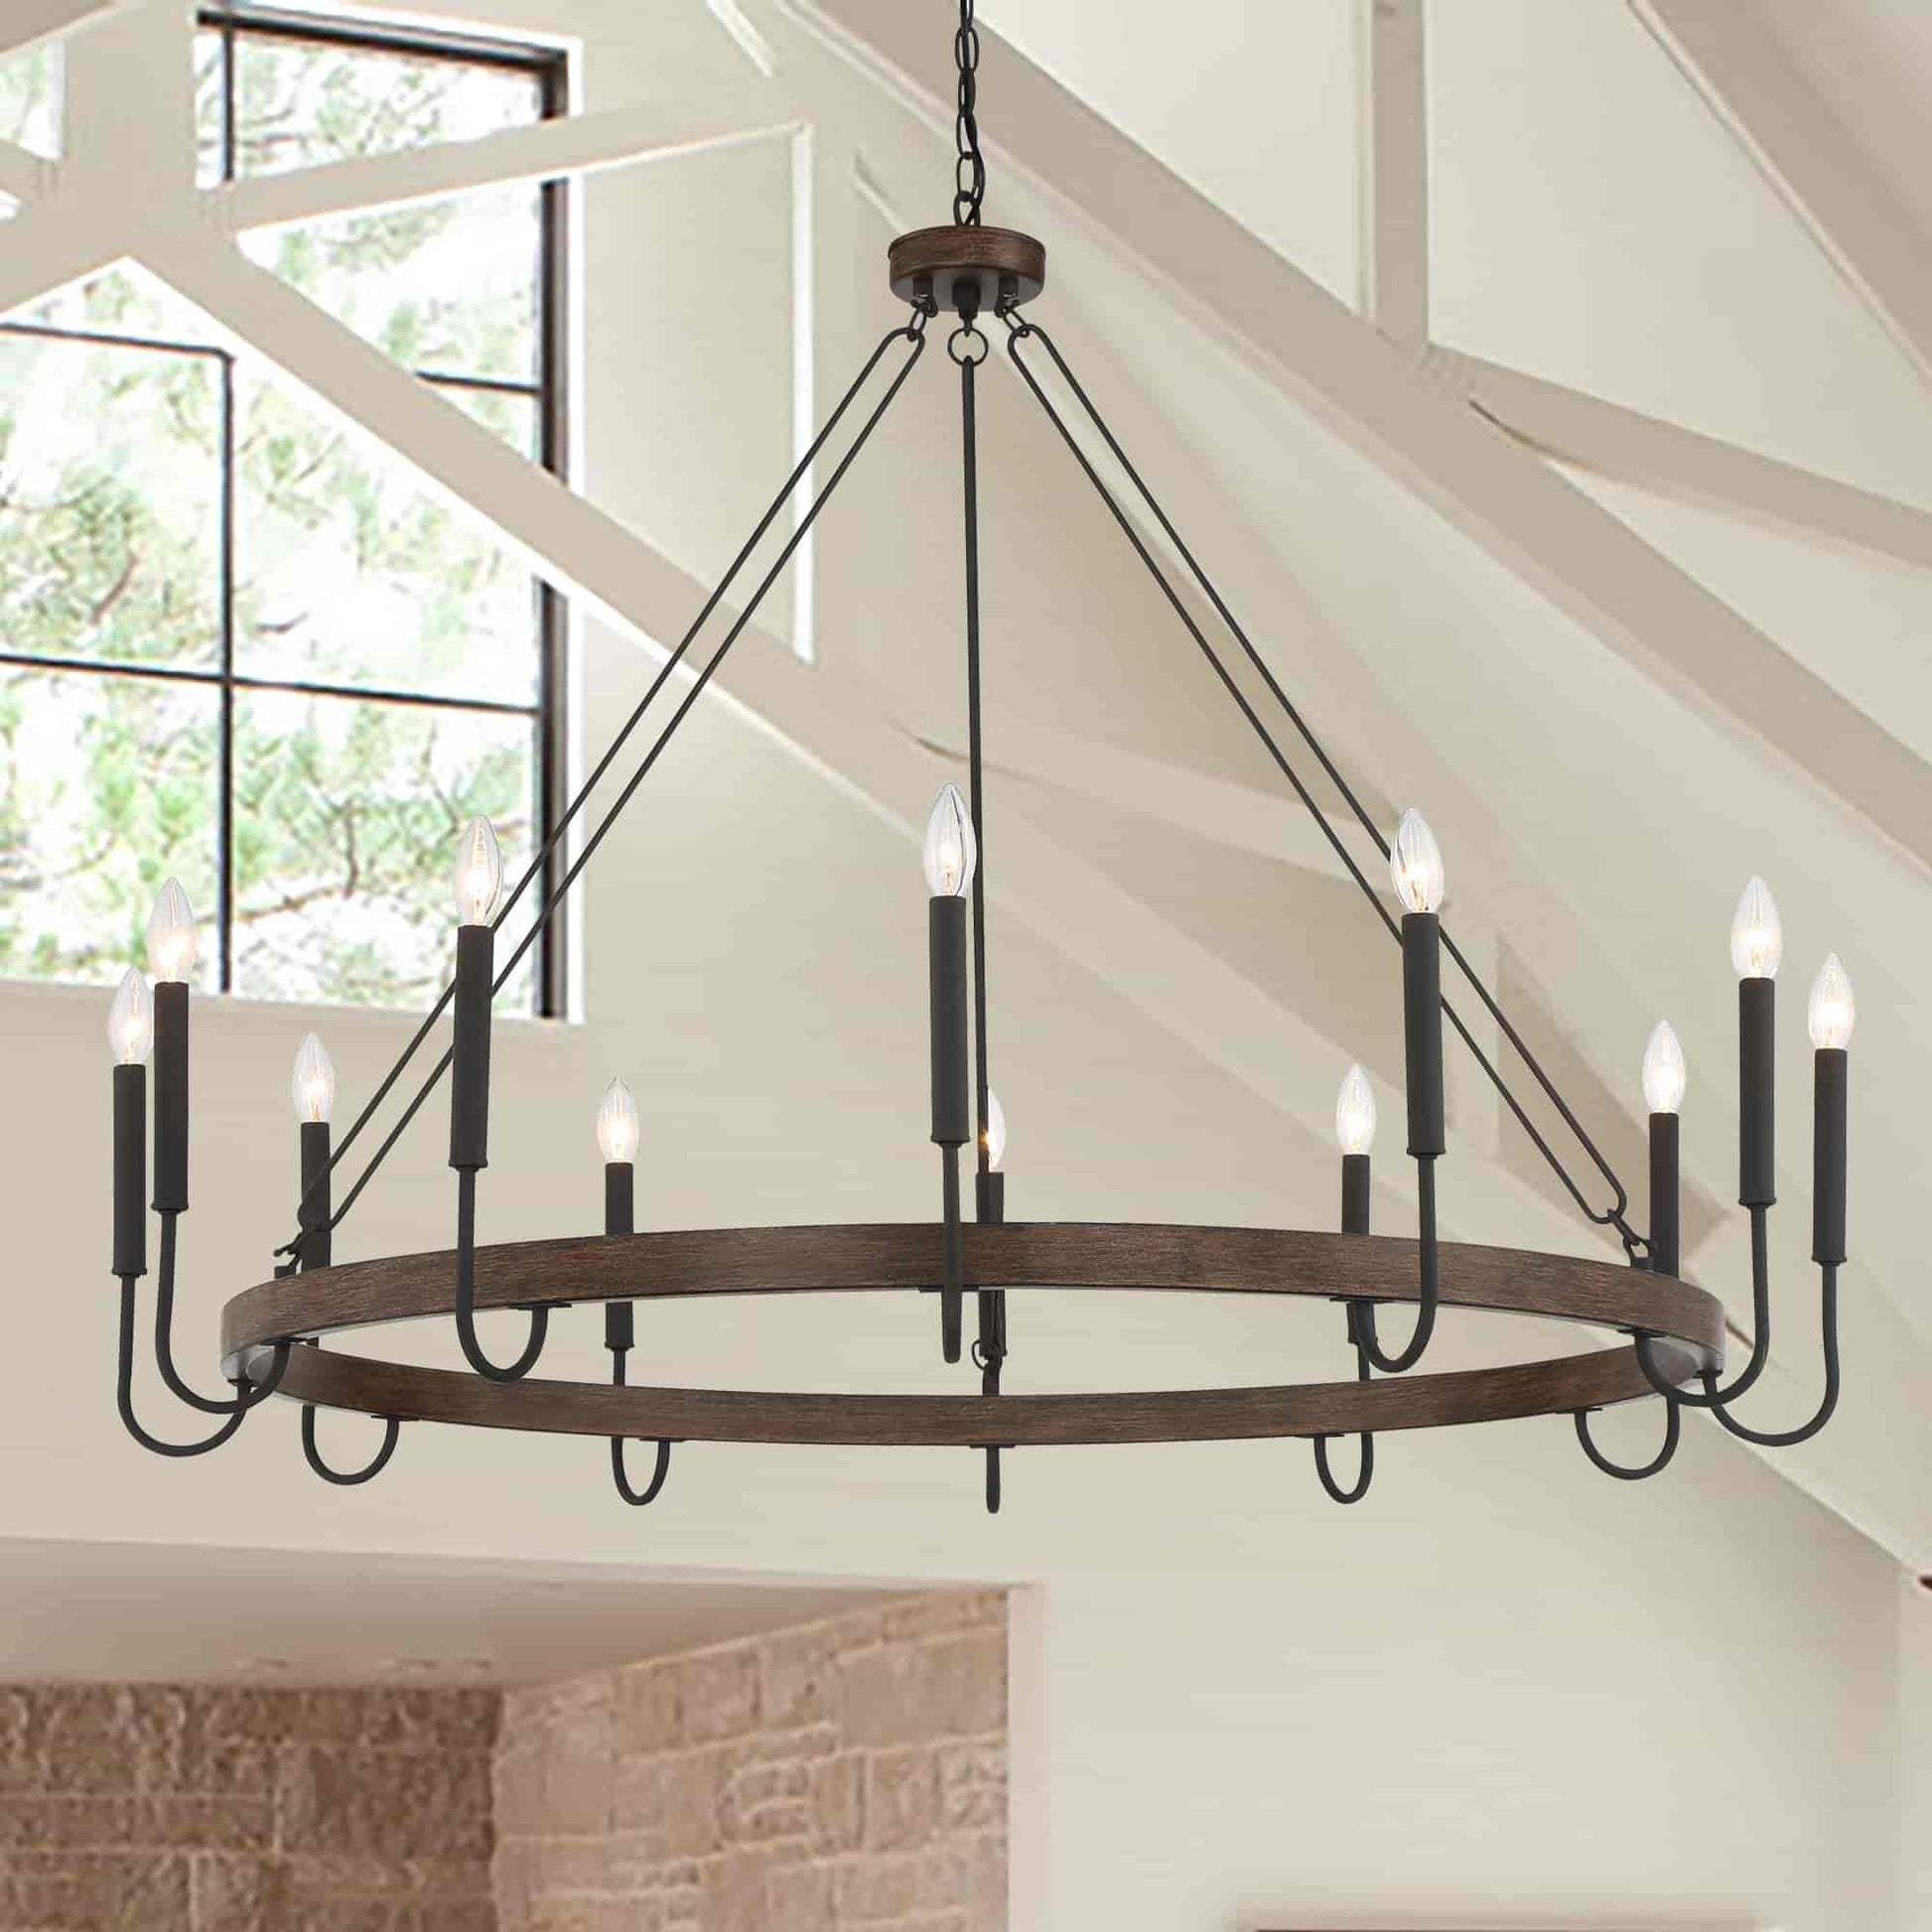 12 light candle style wagon wheel chain chandelier (15) by ACROMA